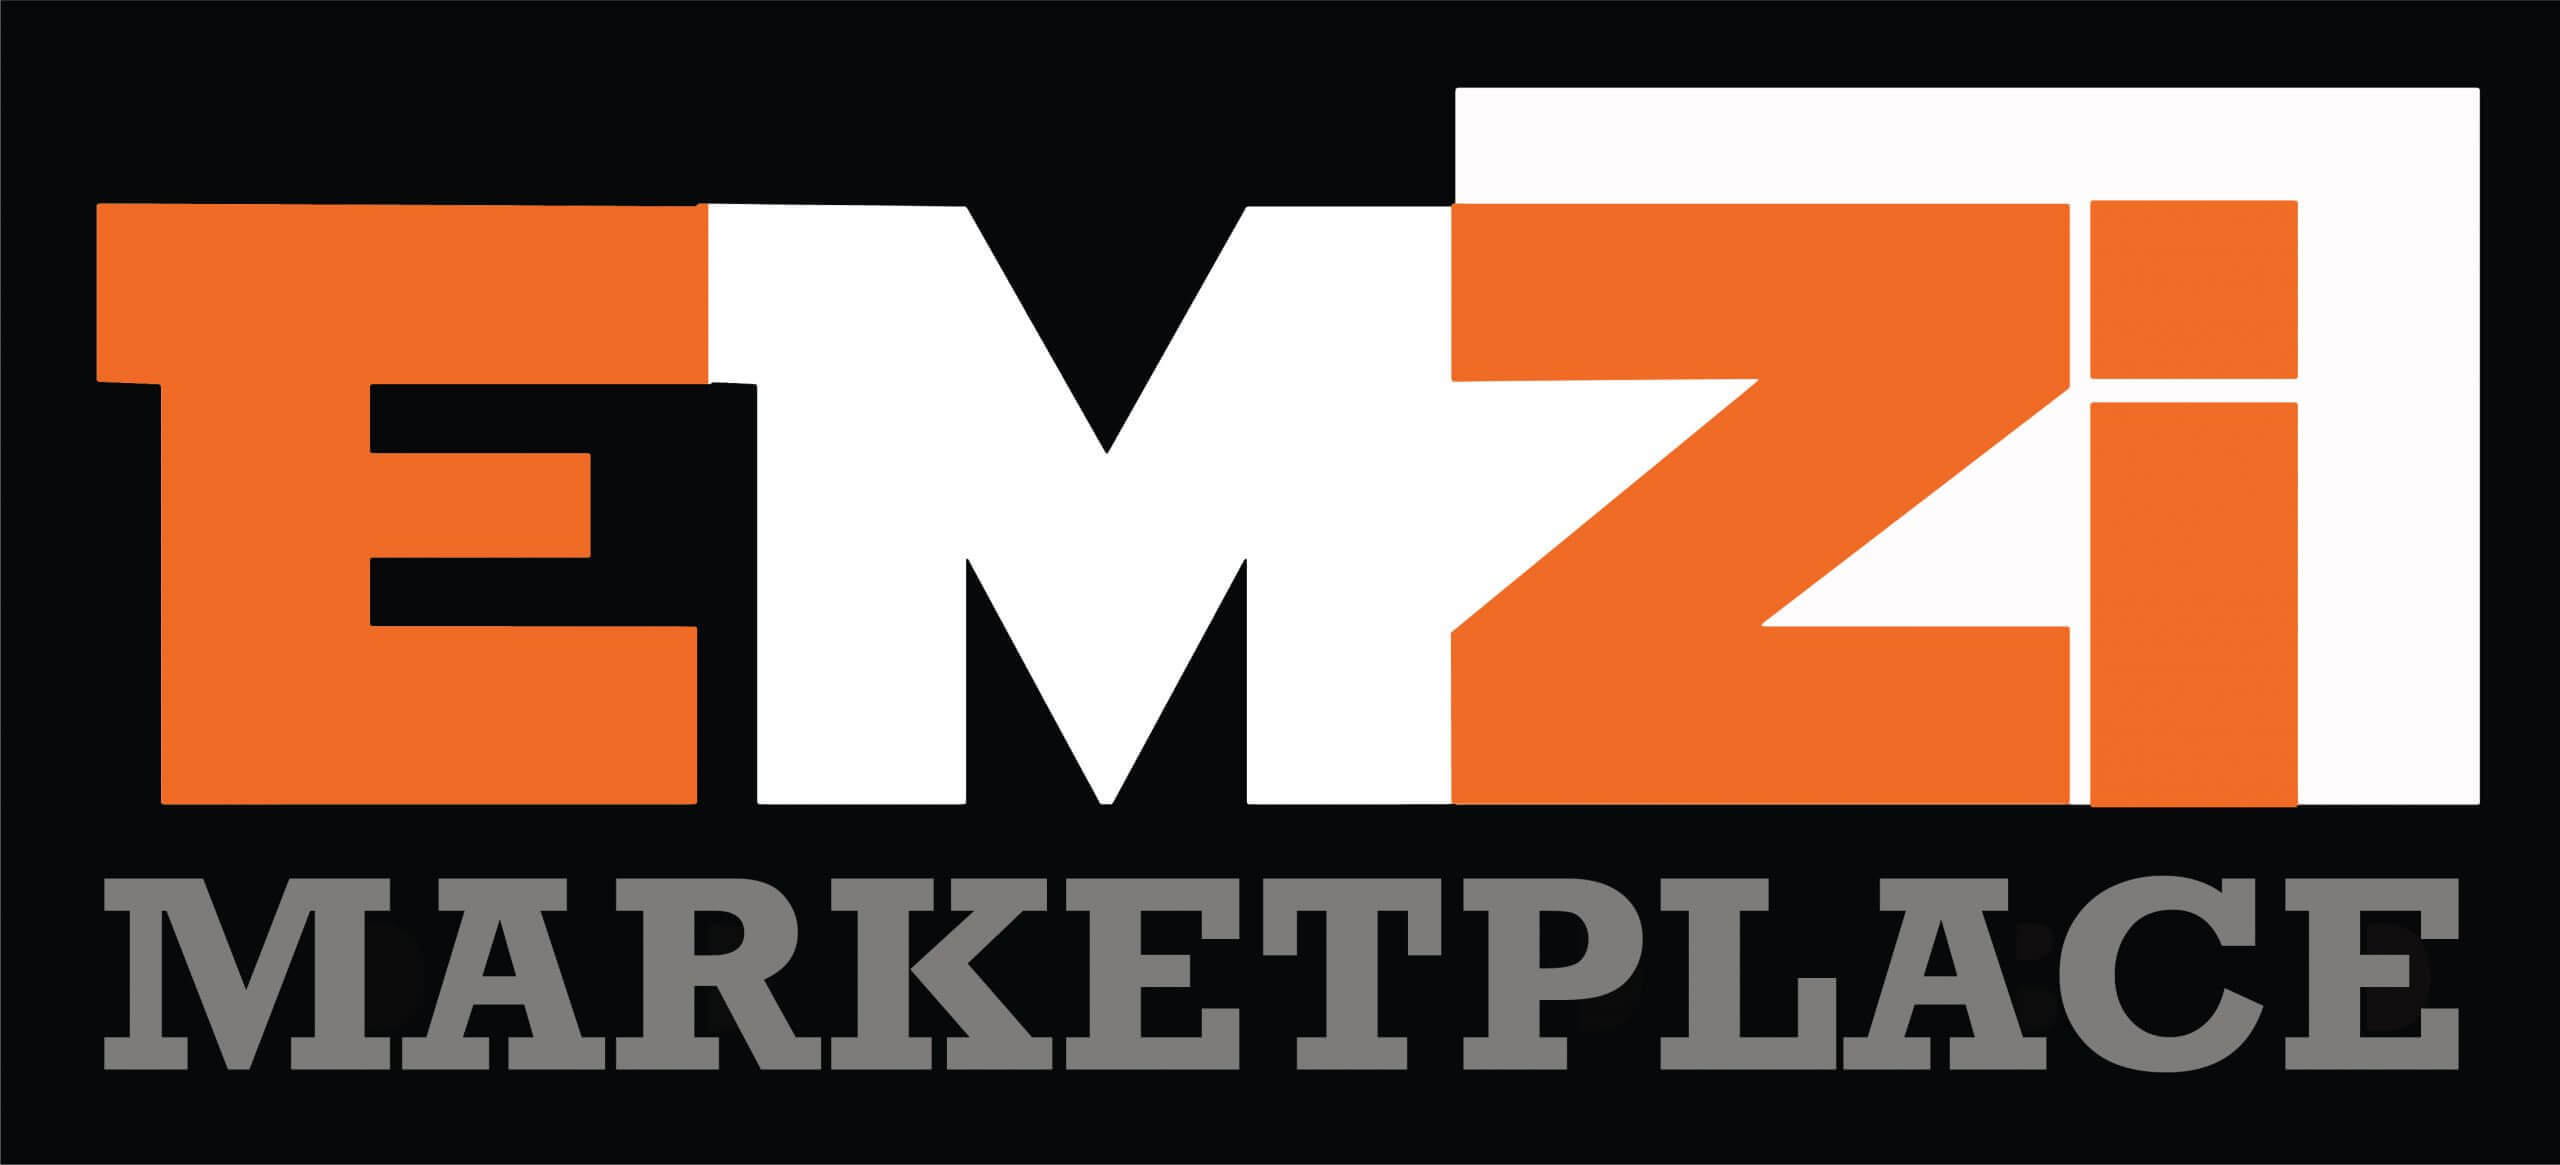 Welcome to Emzi Marketplace